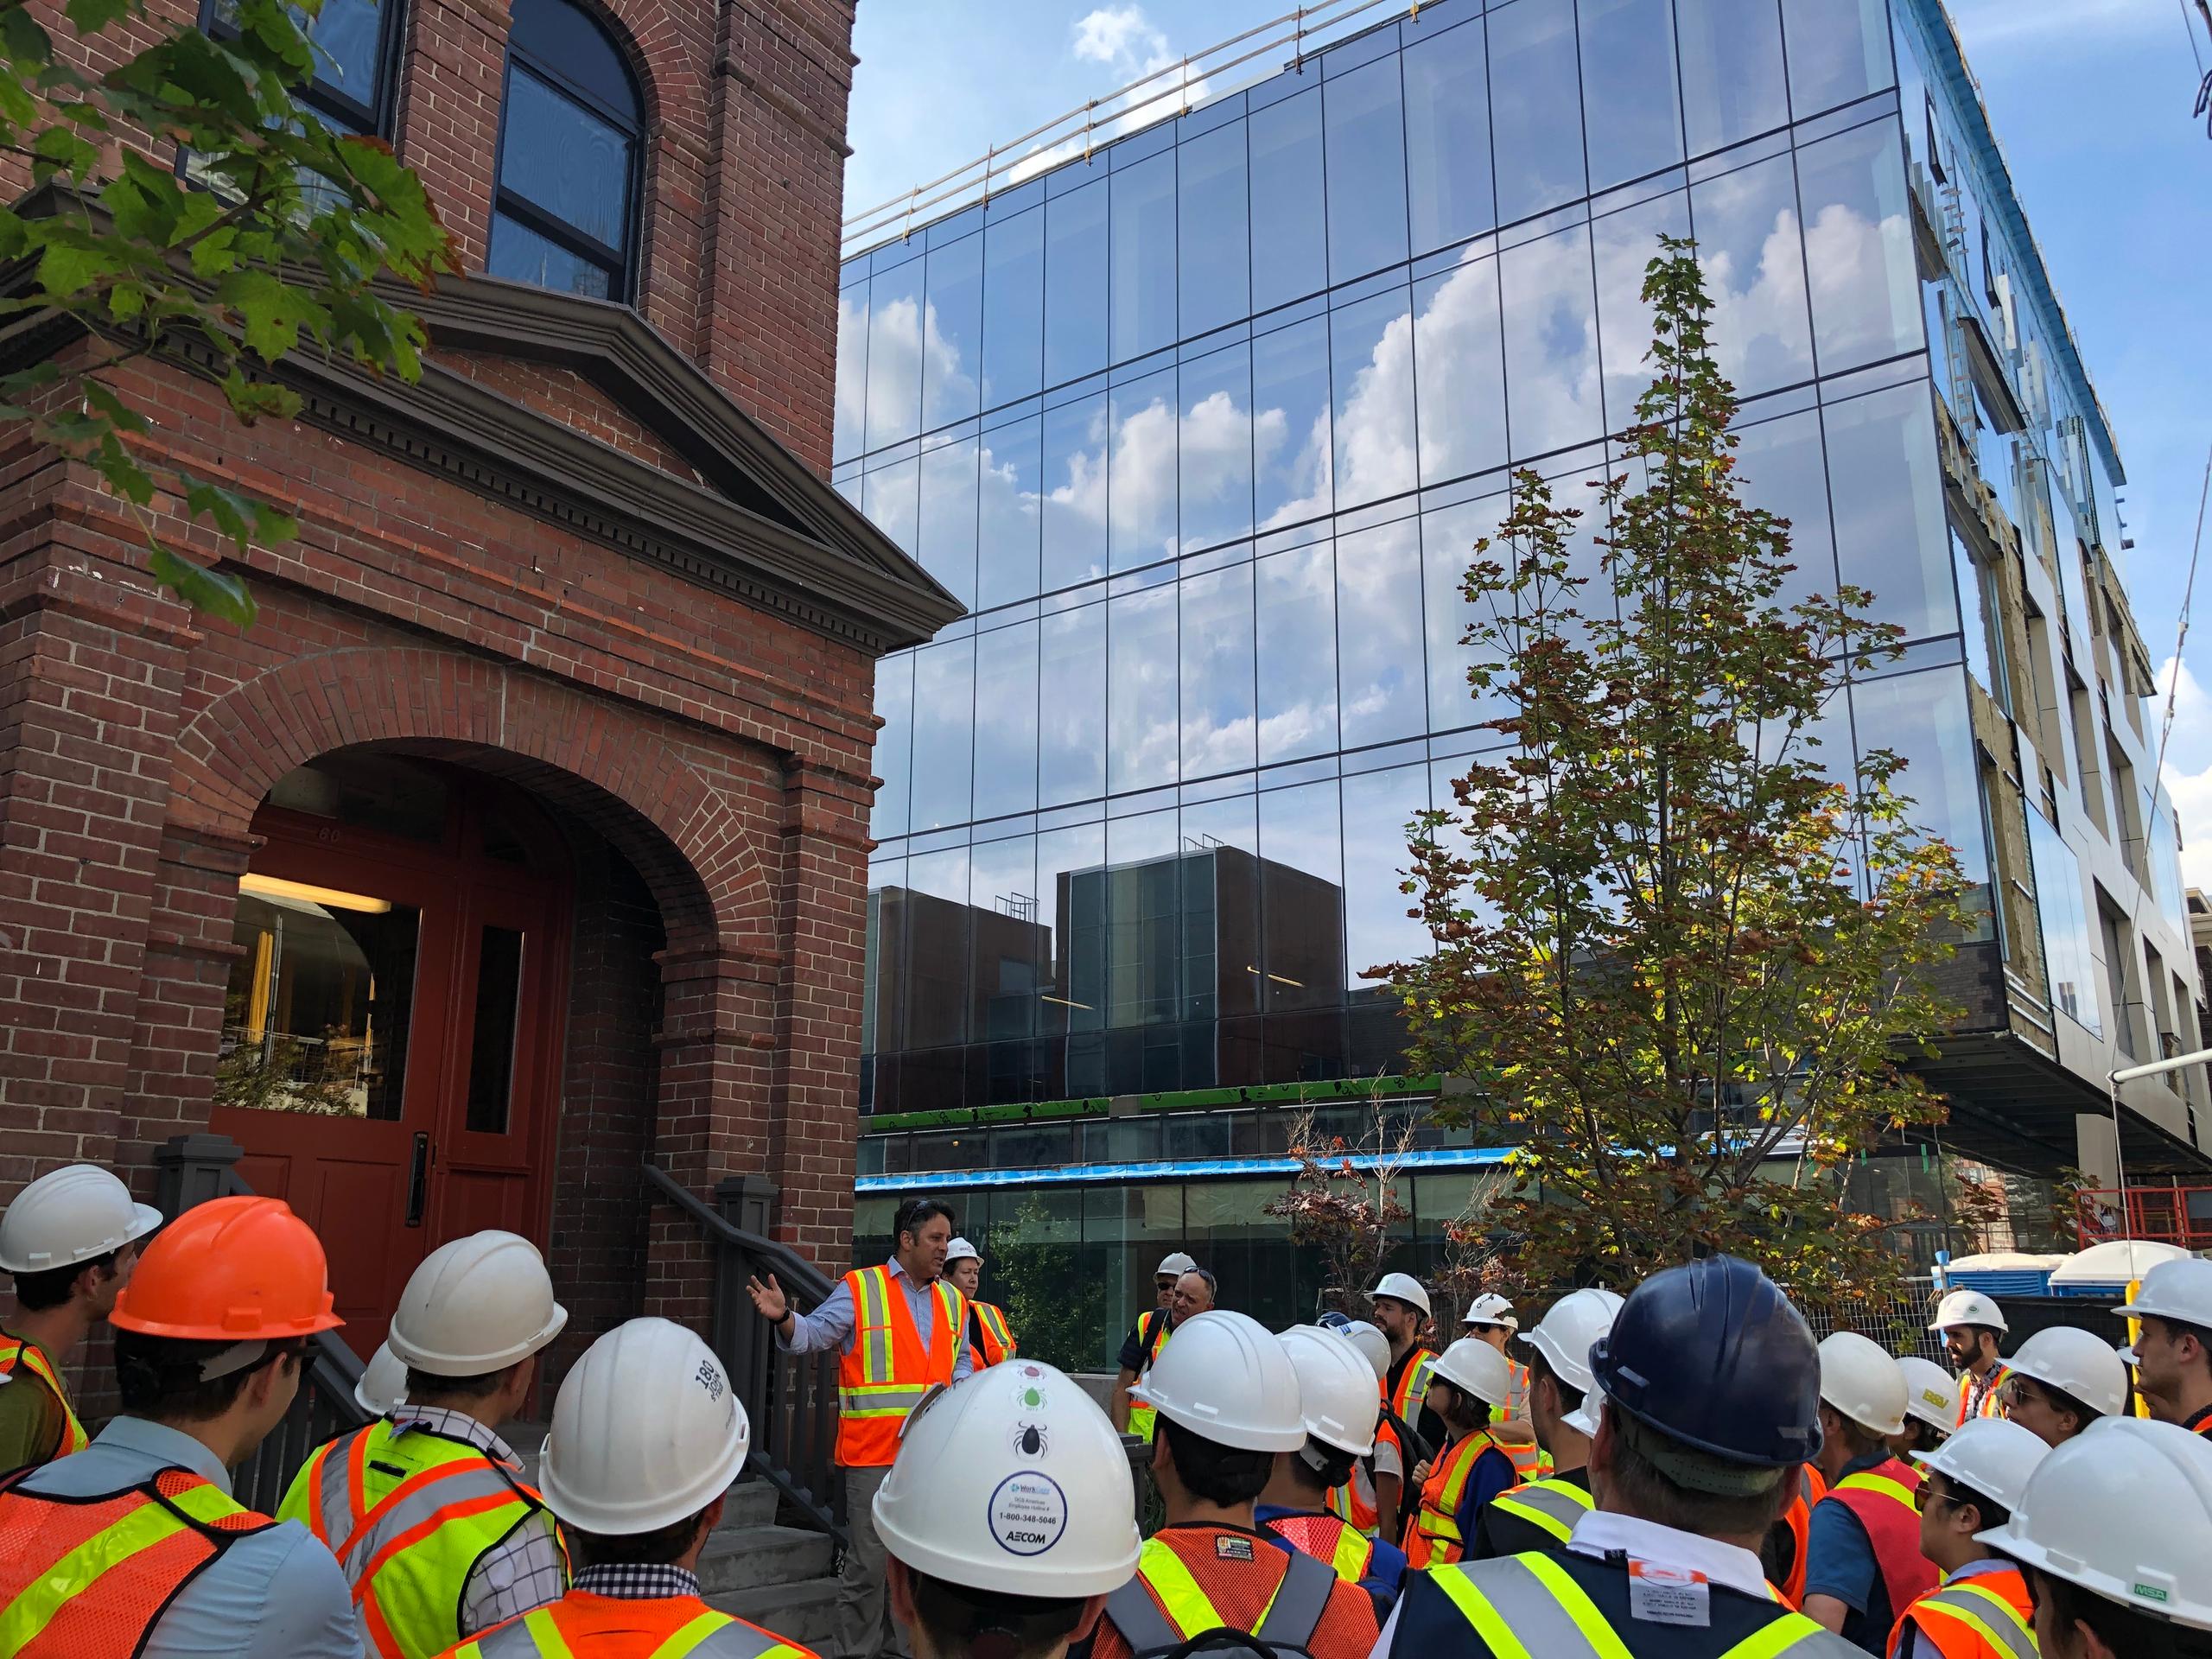 Richard Witt about to lead a tour of mass timber commercial building 80 Atlantic to architecture enthusiasts, with the fully glazed south facade in the background